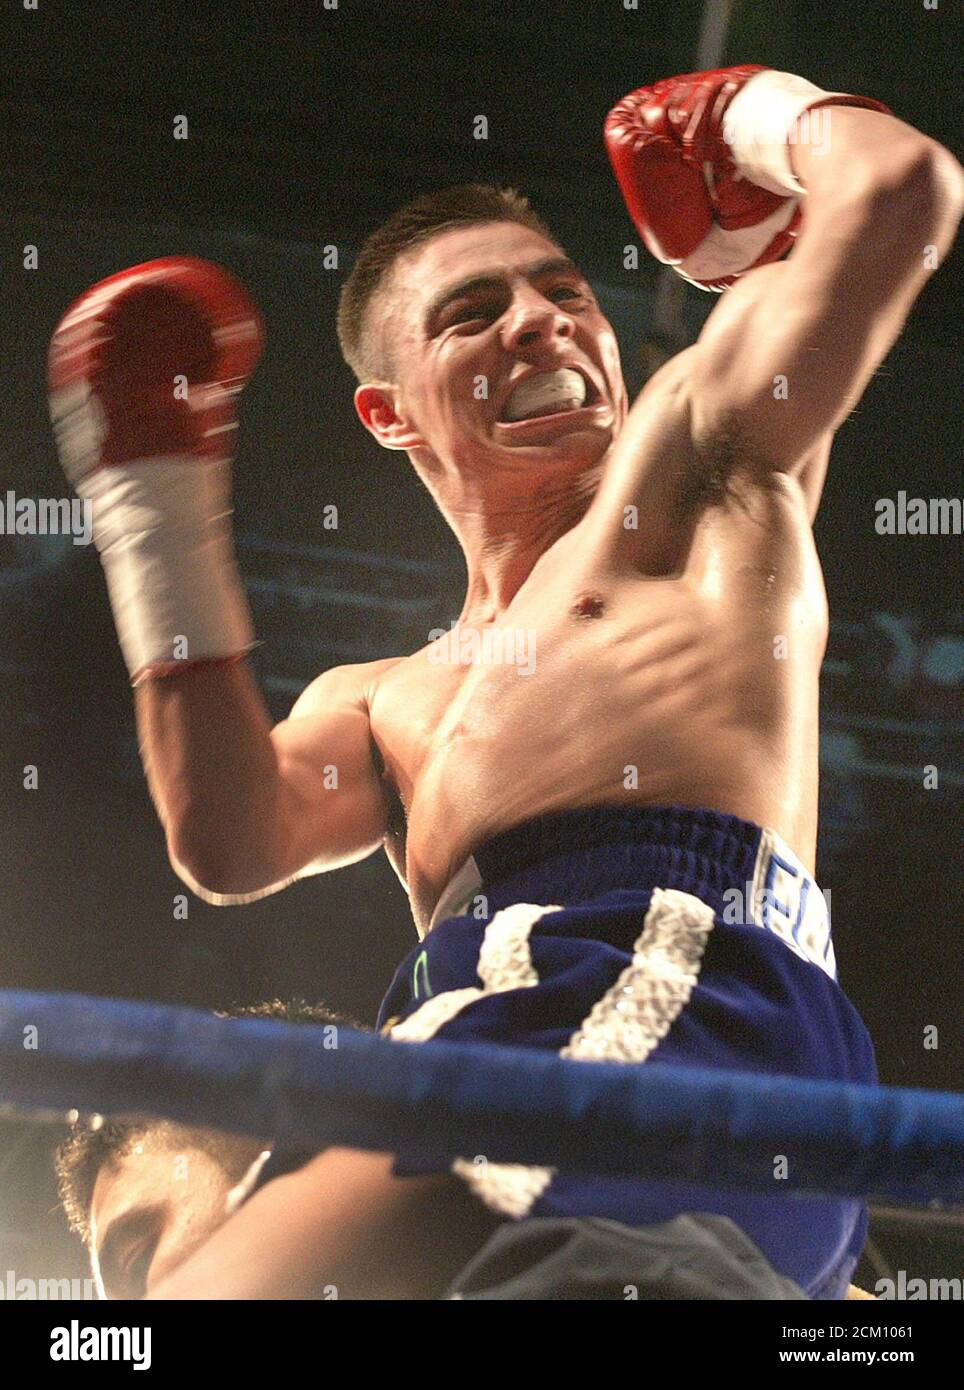 World Boxing Council (WBC) Light Flyweight champion Jorge Arce from Mexico  celebrates his victory over Joma Gamboa of the Philippines, at the Banamex  Center in Mexico City, January 10, 2004. Arce retained